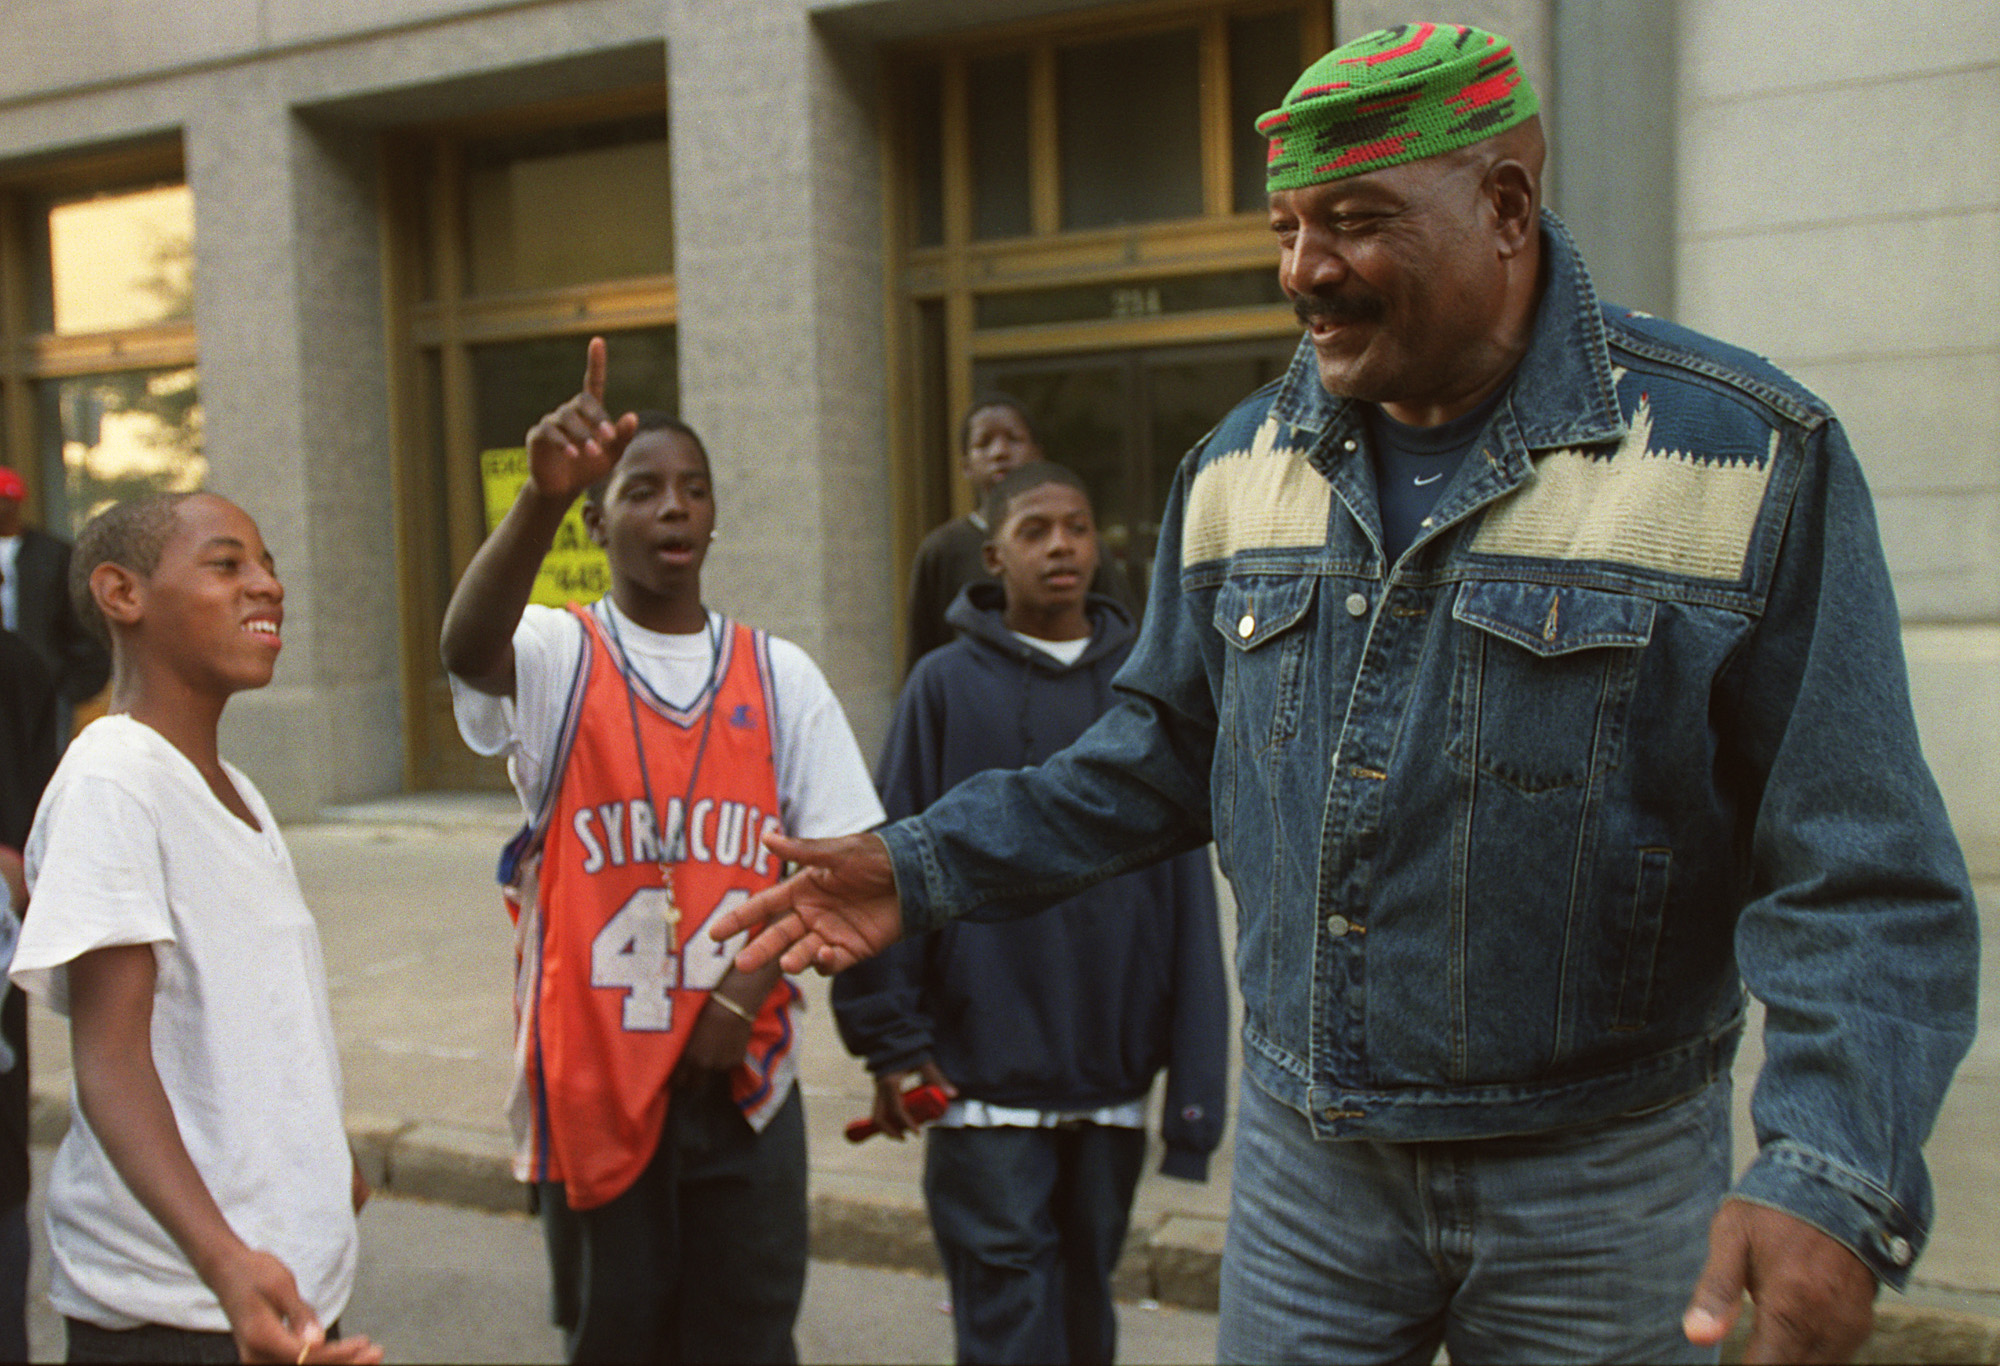 Football legend Jim Brown talks with a group of boys on Warren St. in Syracuse in 2002. Brown and renowned filmmaker Spike Lee addressed a group of local community leaders and youth about the prospect of bringing a program that works with ex-convicts to Syracuse. Brown and Lee are in town for the presentation of Lee's film "Jim Brown;All-American."